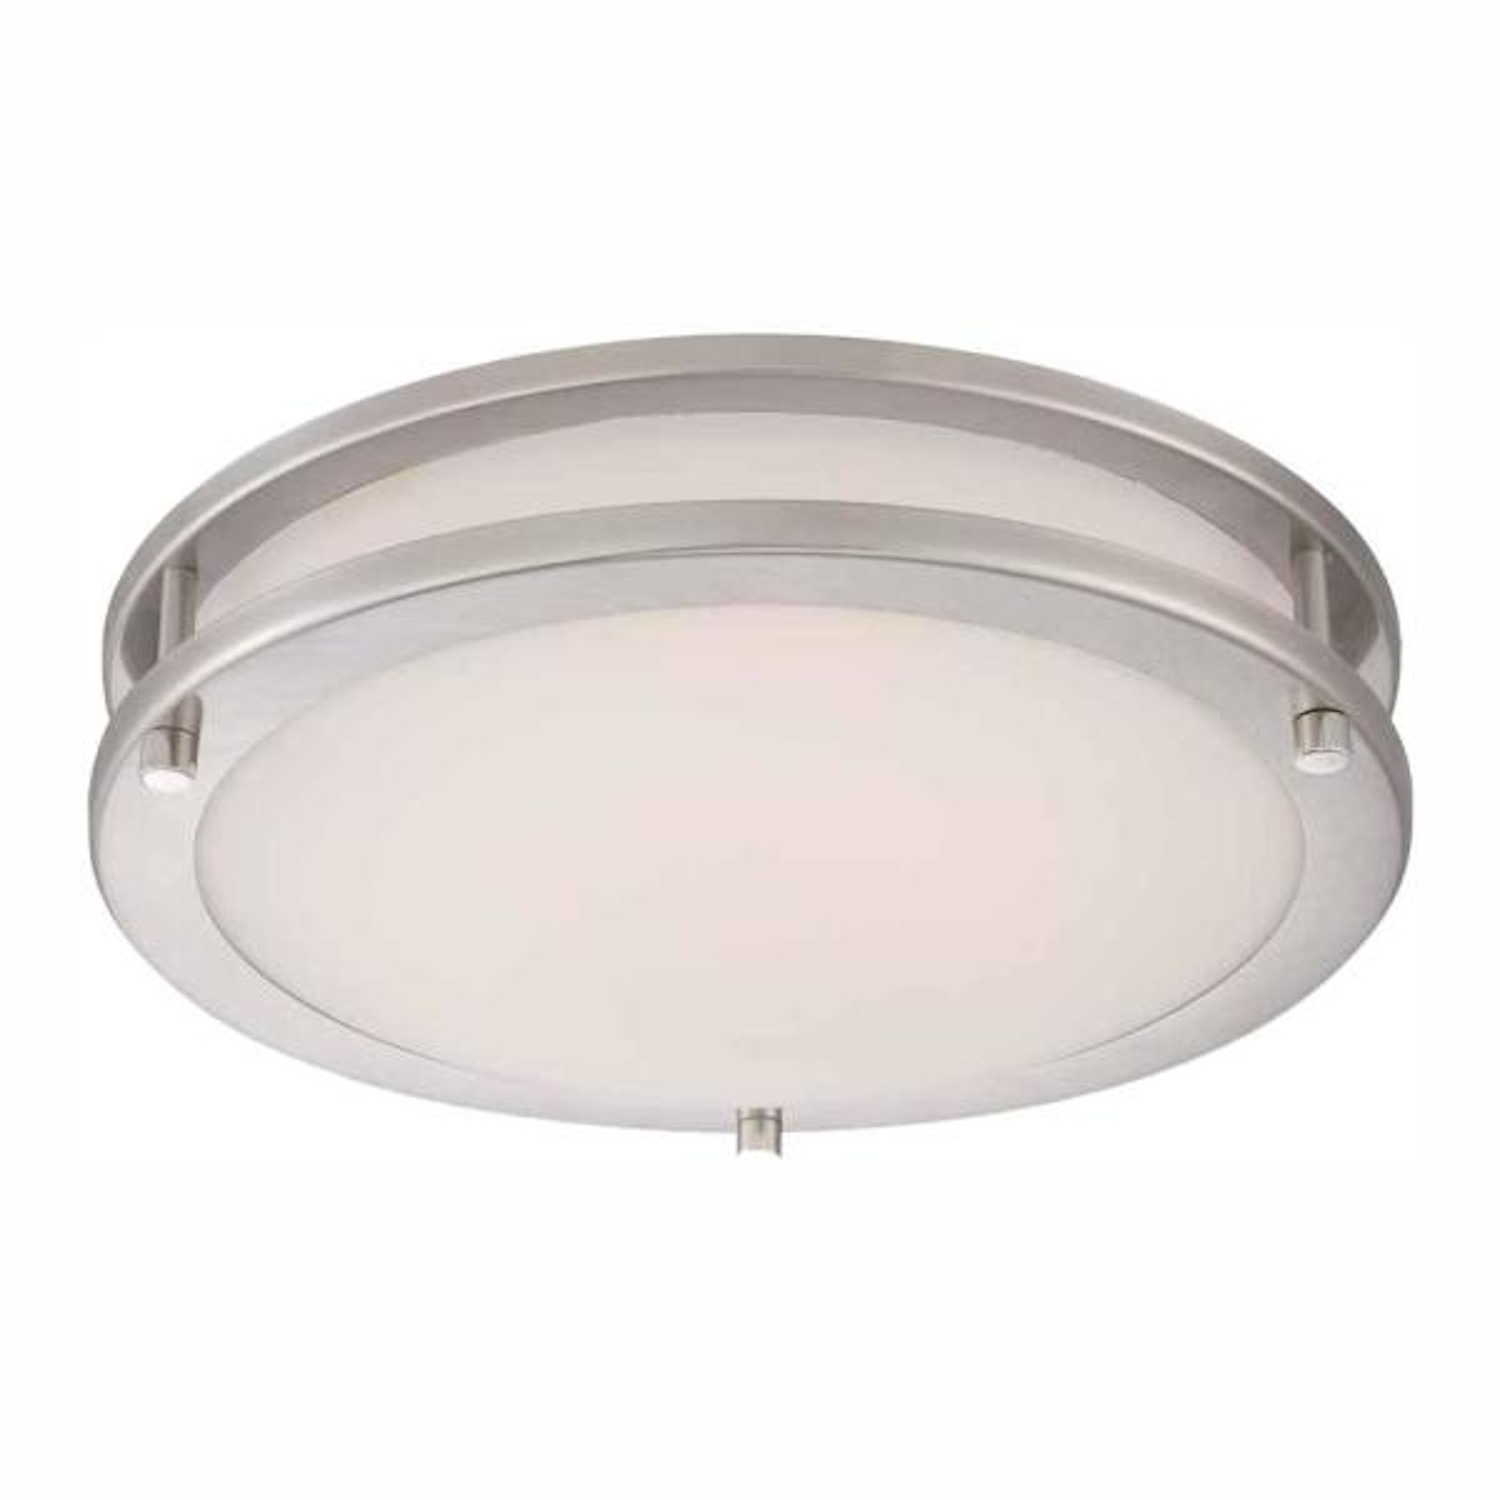 Photos - Chandelier / Lamp Westinghouse 3.5 in. H X 11 in. W X 11 in. L Brushed Nickel Ceiling Light 